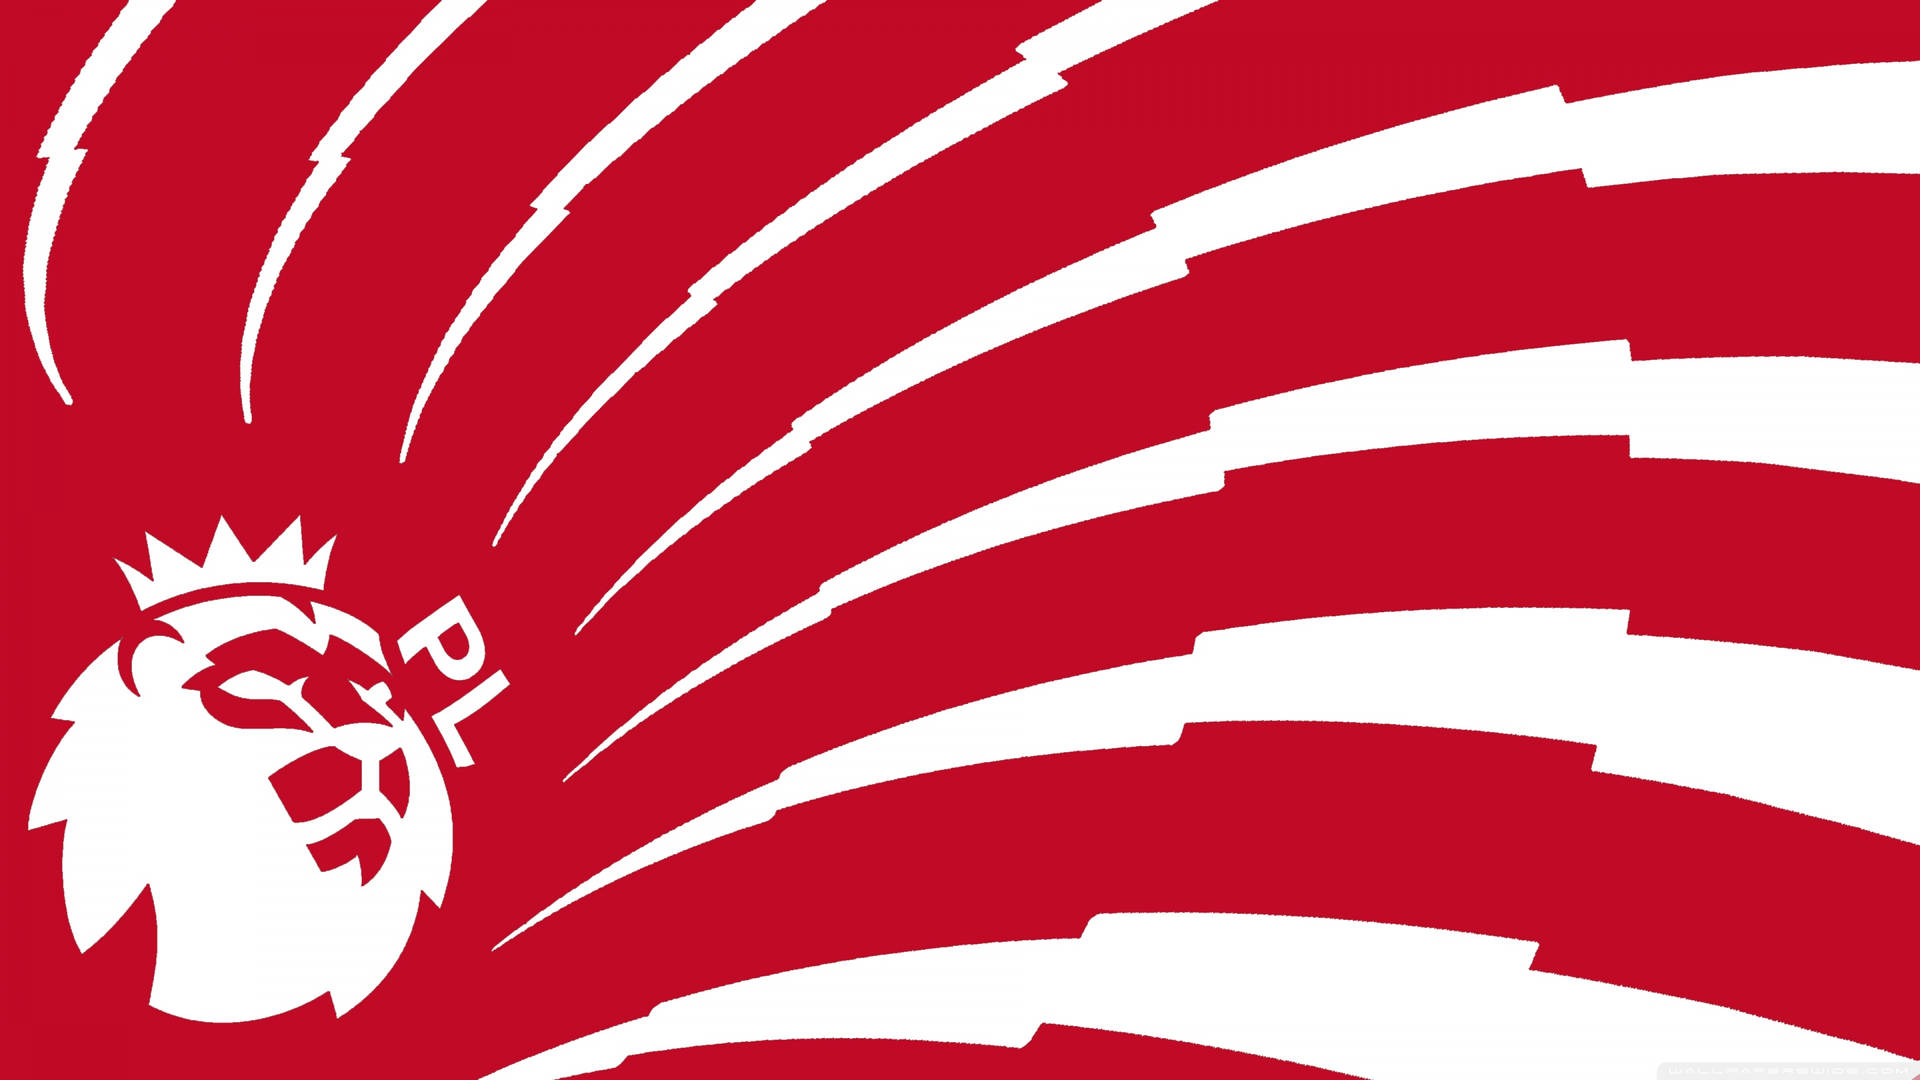 Premier League Red And White Background